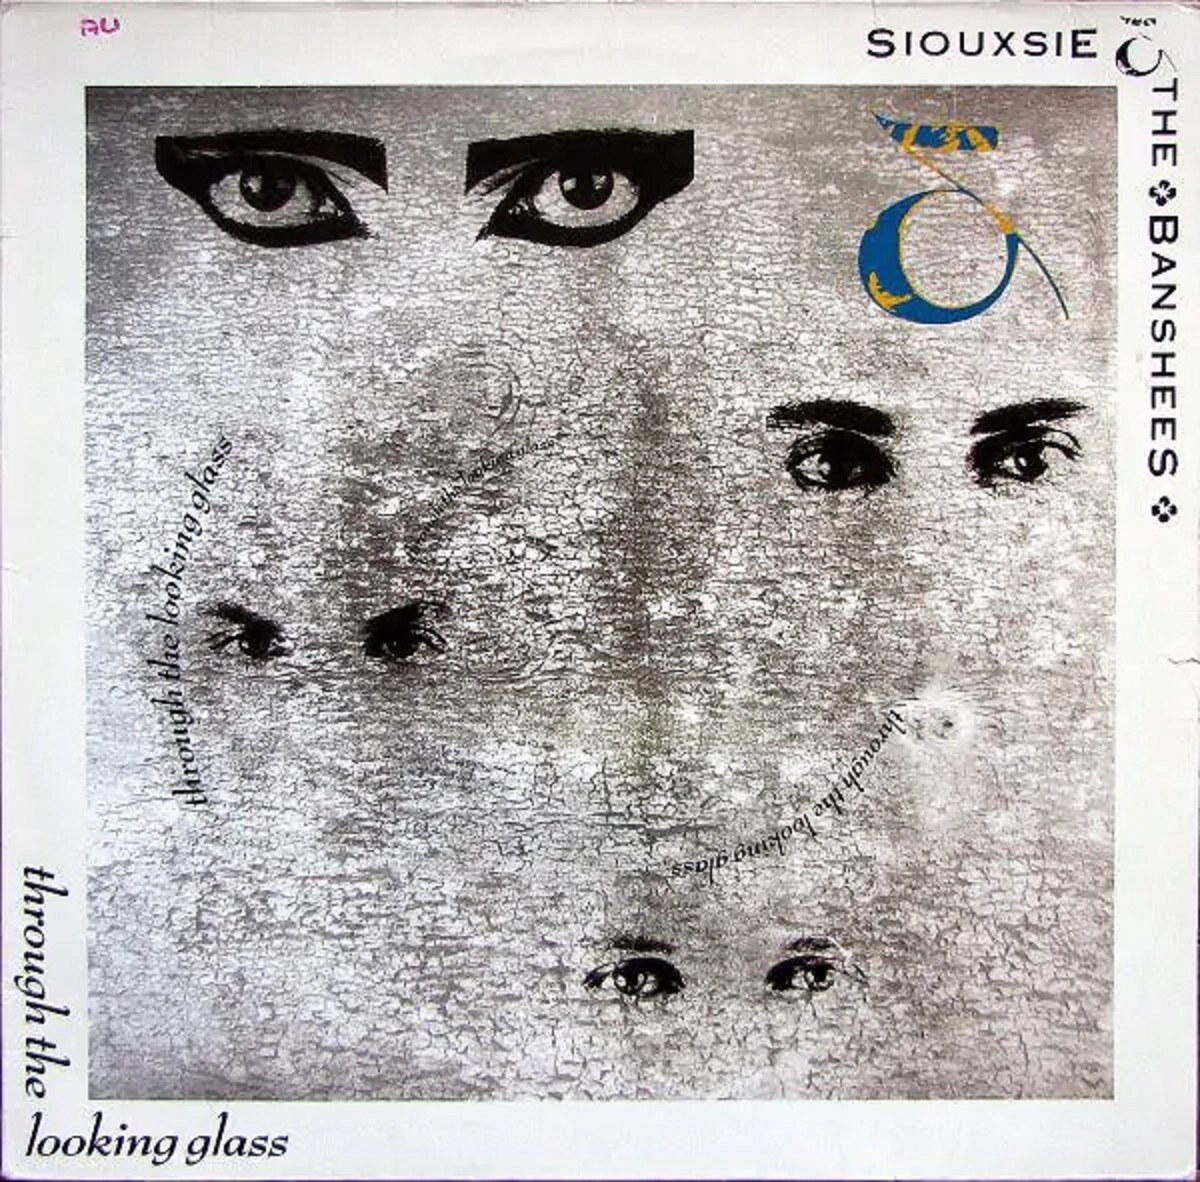 Siouxsie And The Banshees, "Through the Looking Glass" (1987)